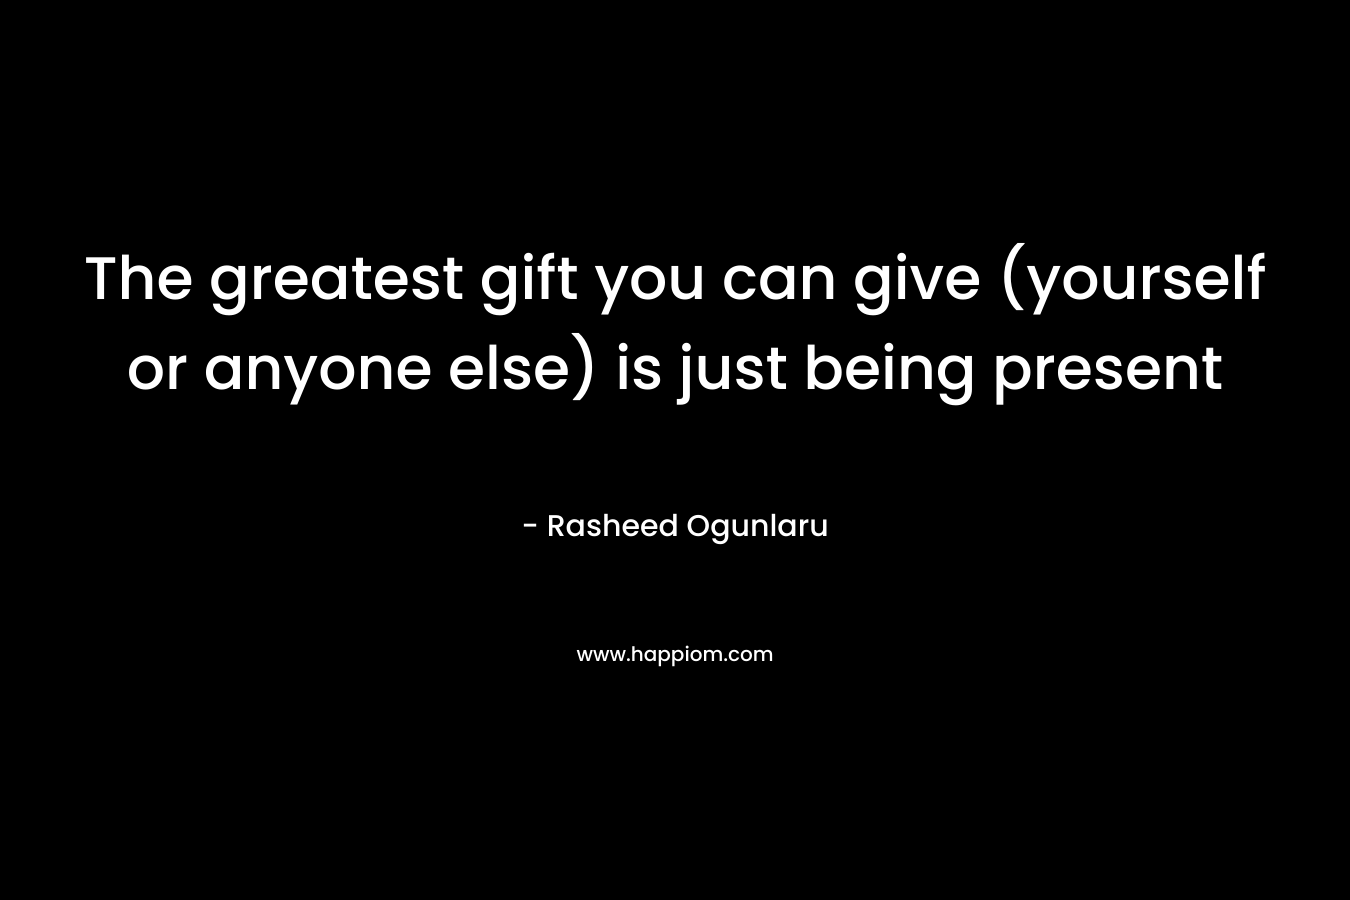 The greatest gift you can give (yourself or anyone else) is just being present